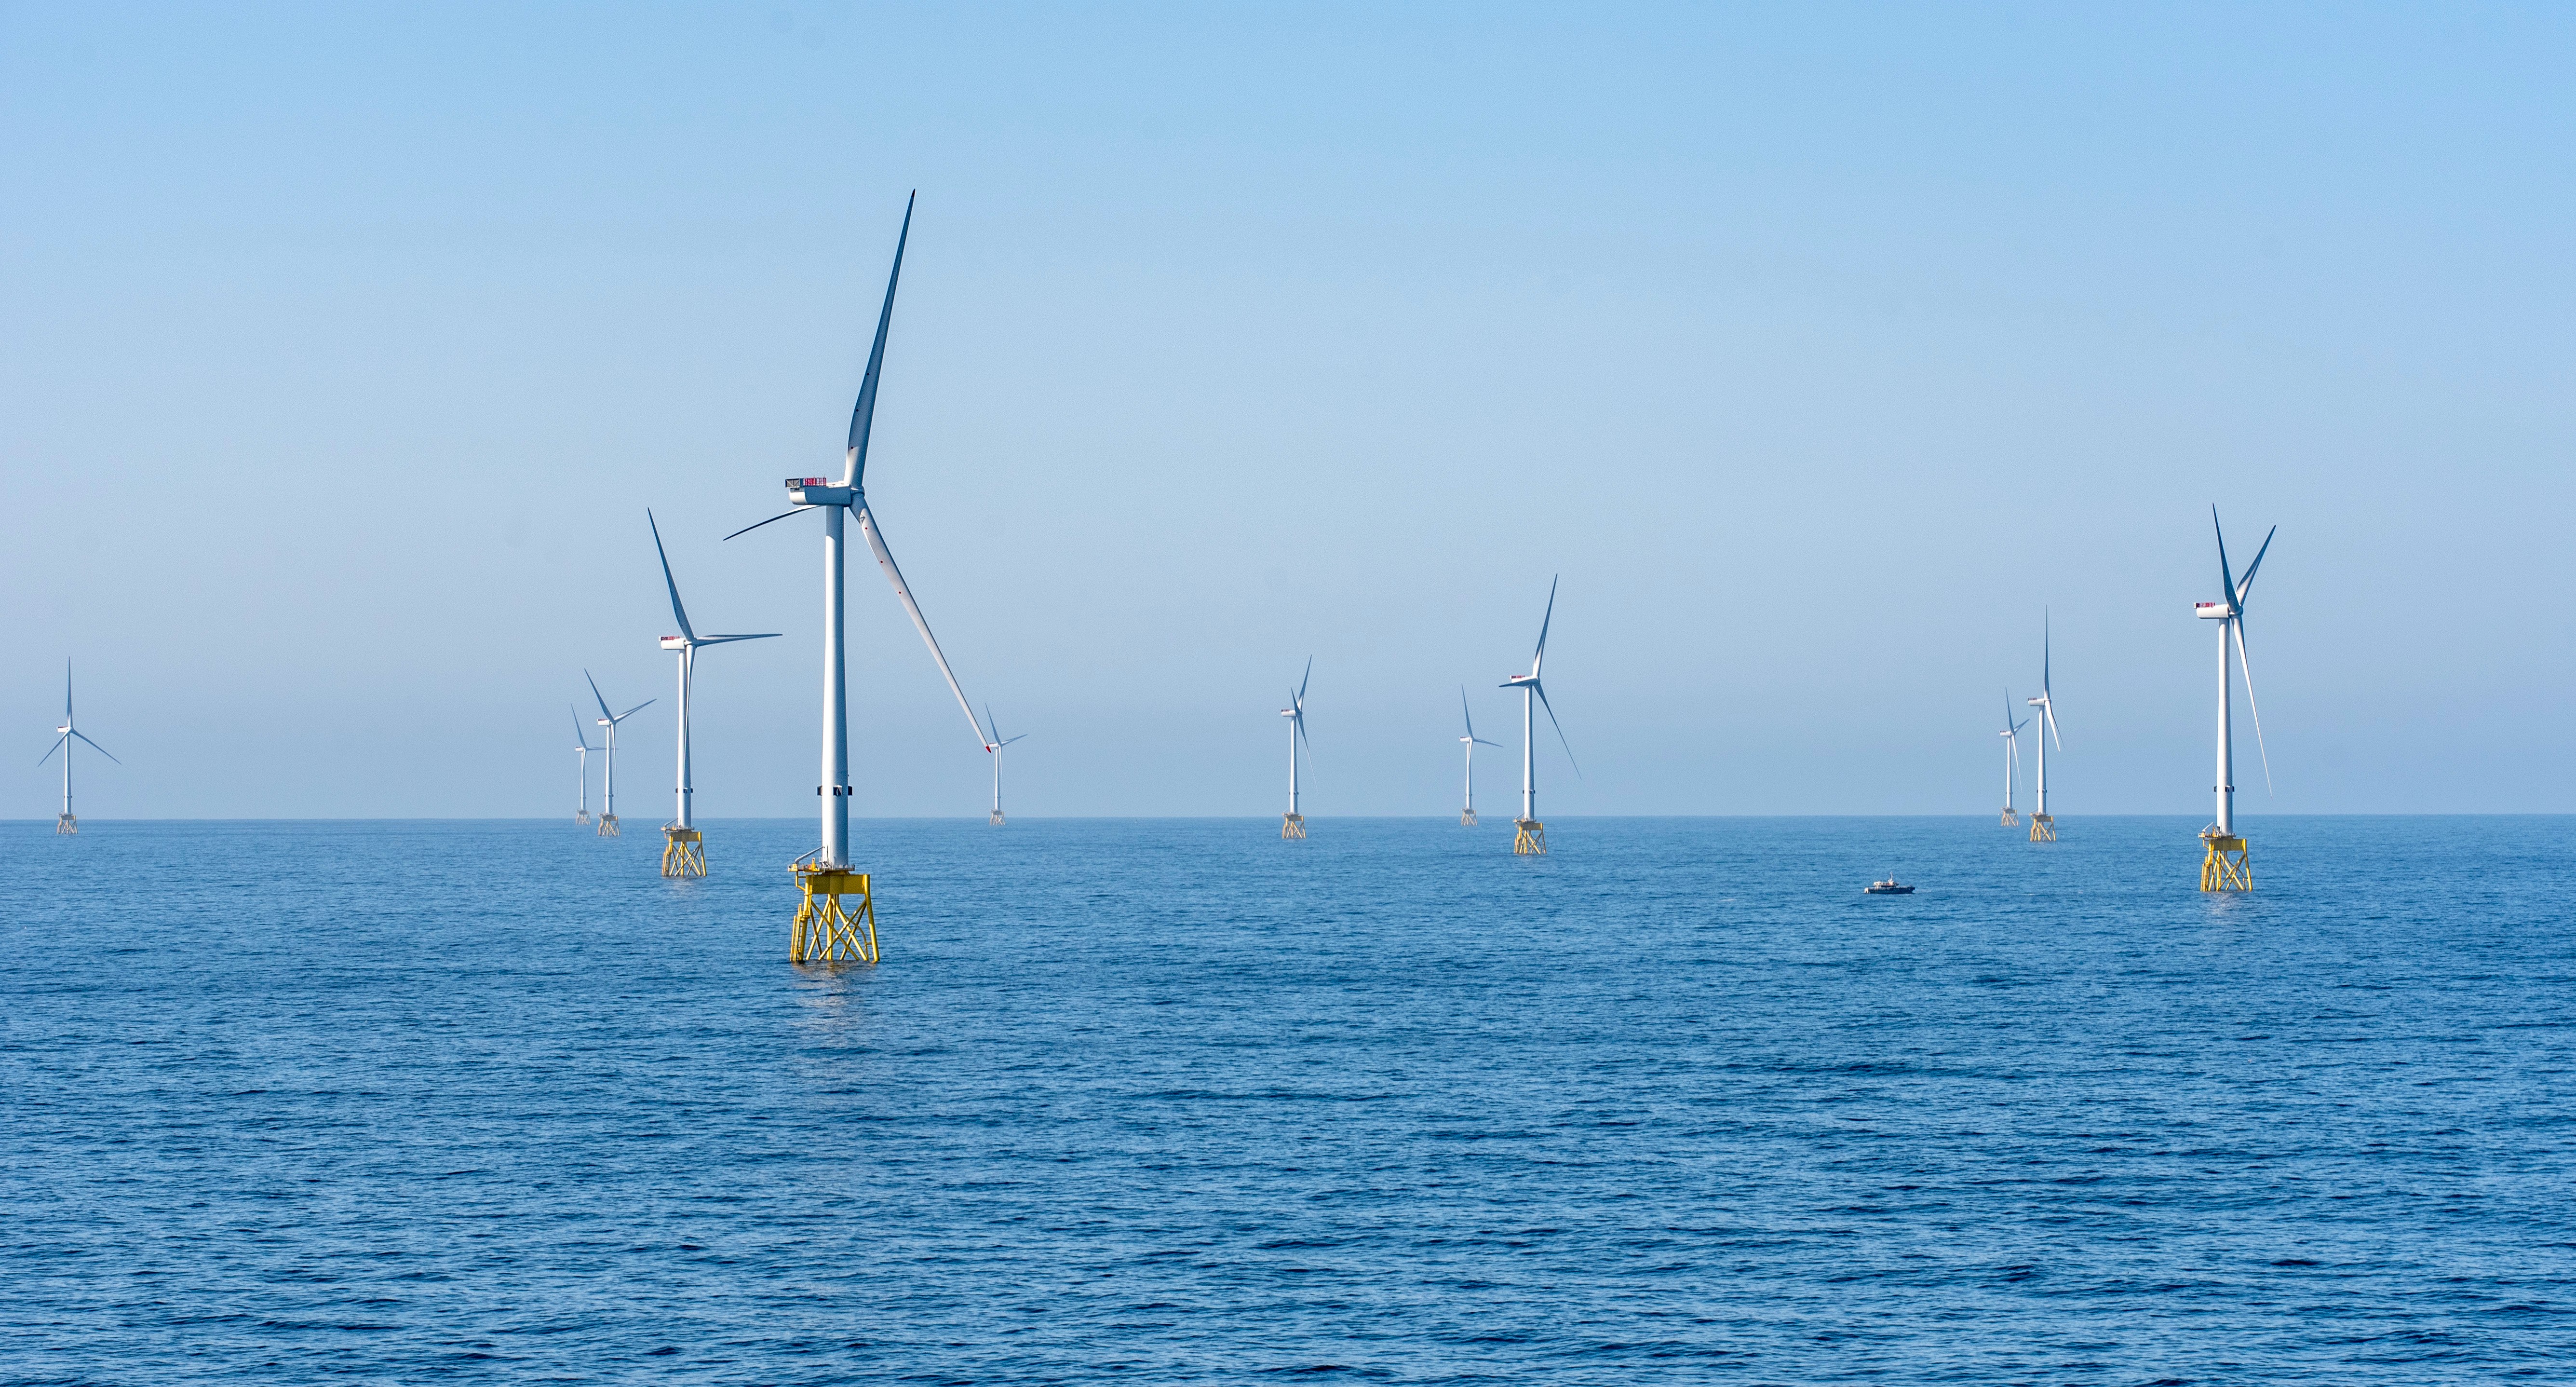 Scotland’s largest offshore wind farm now fully operational